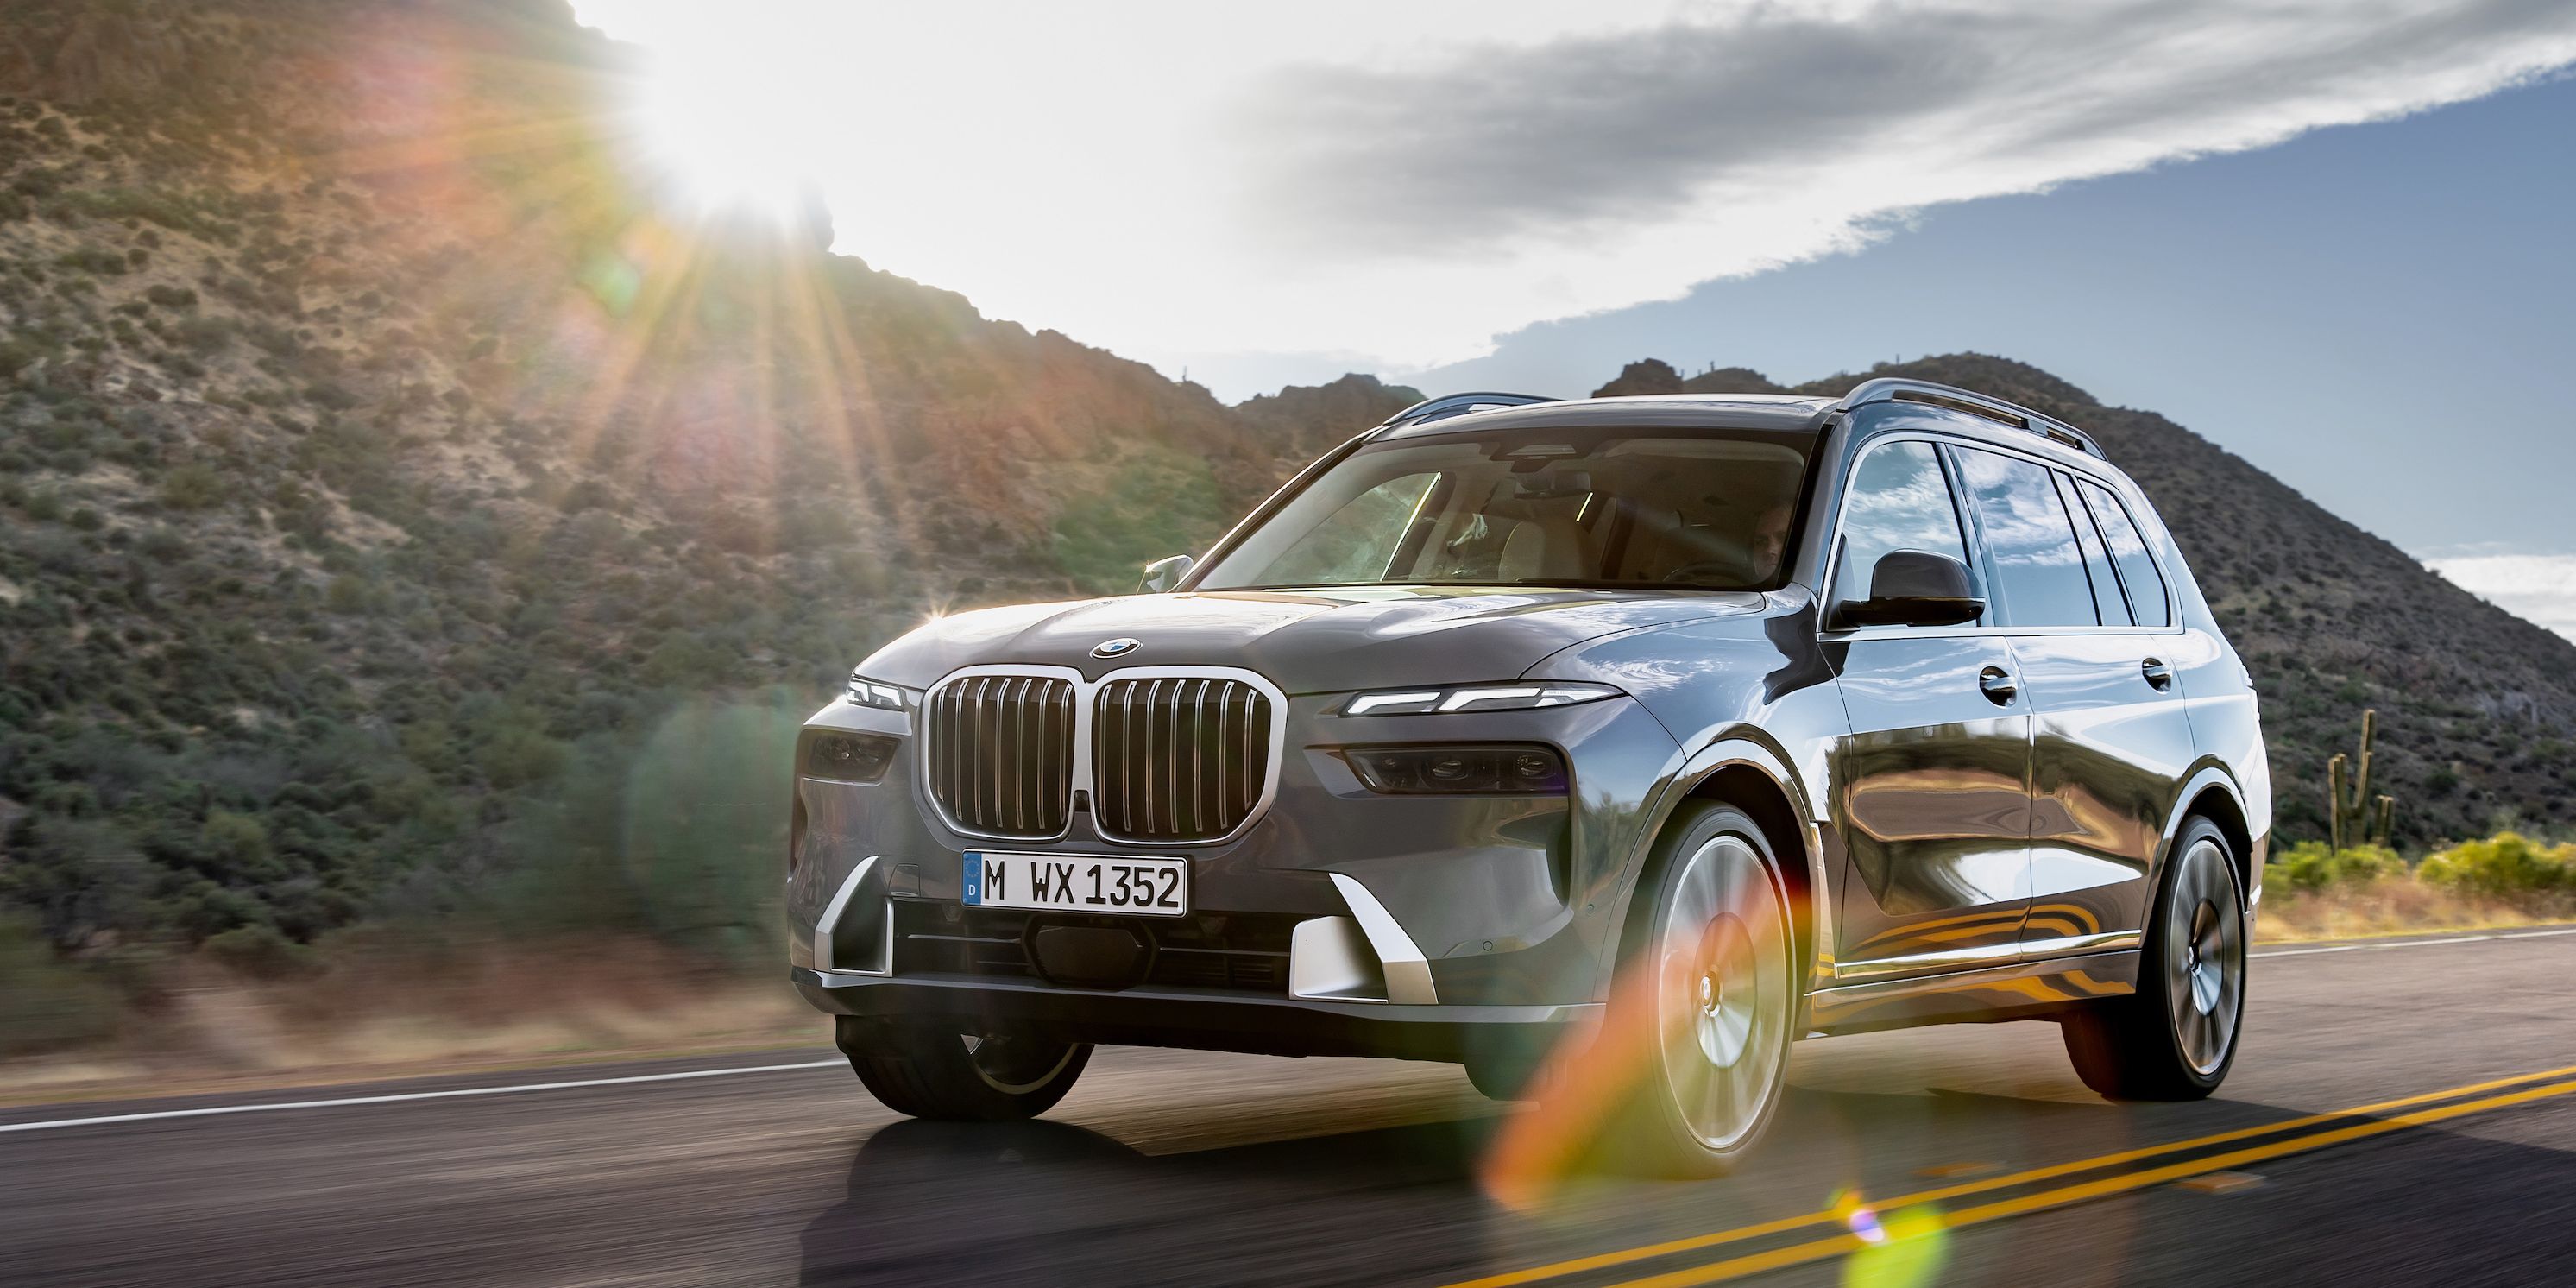 The 2023 BMW X7 Has a Reworked Face With Split Headlights